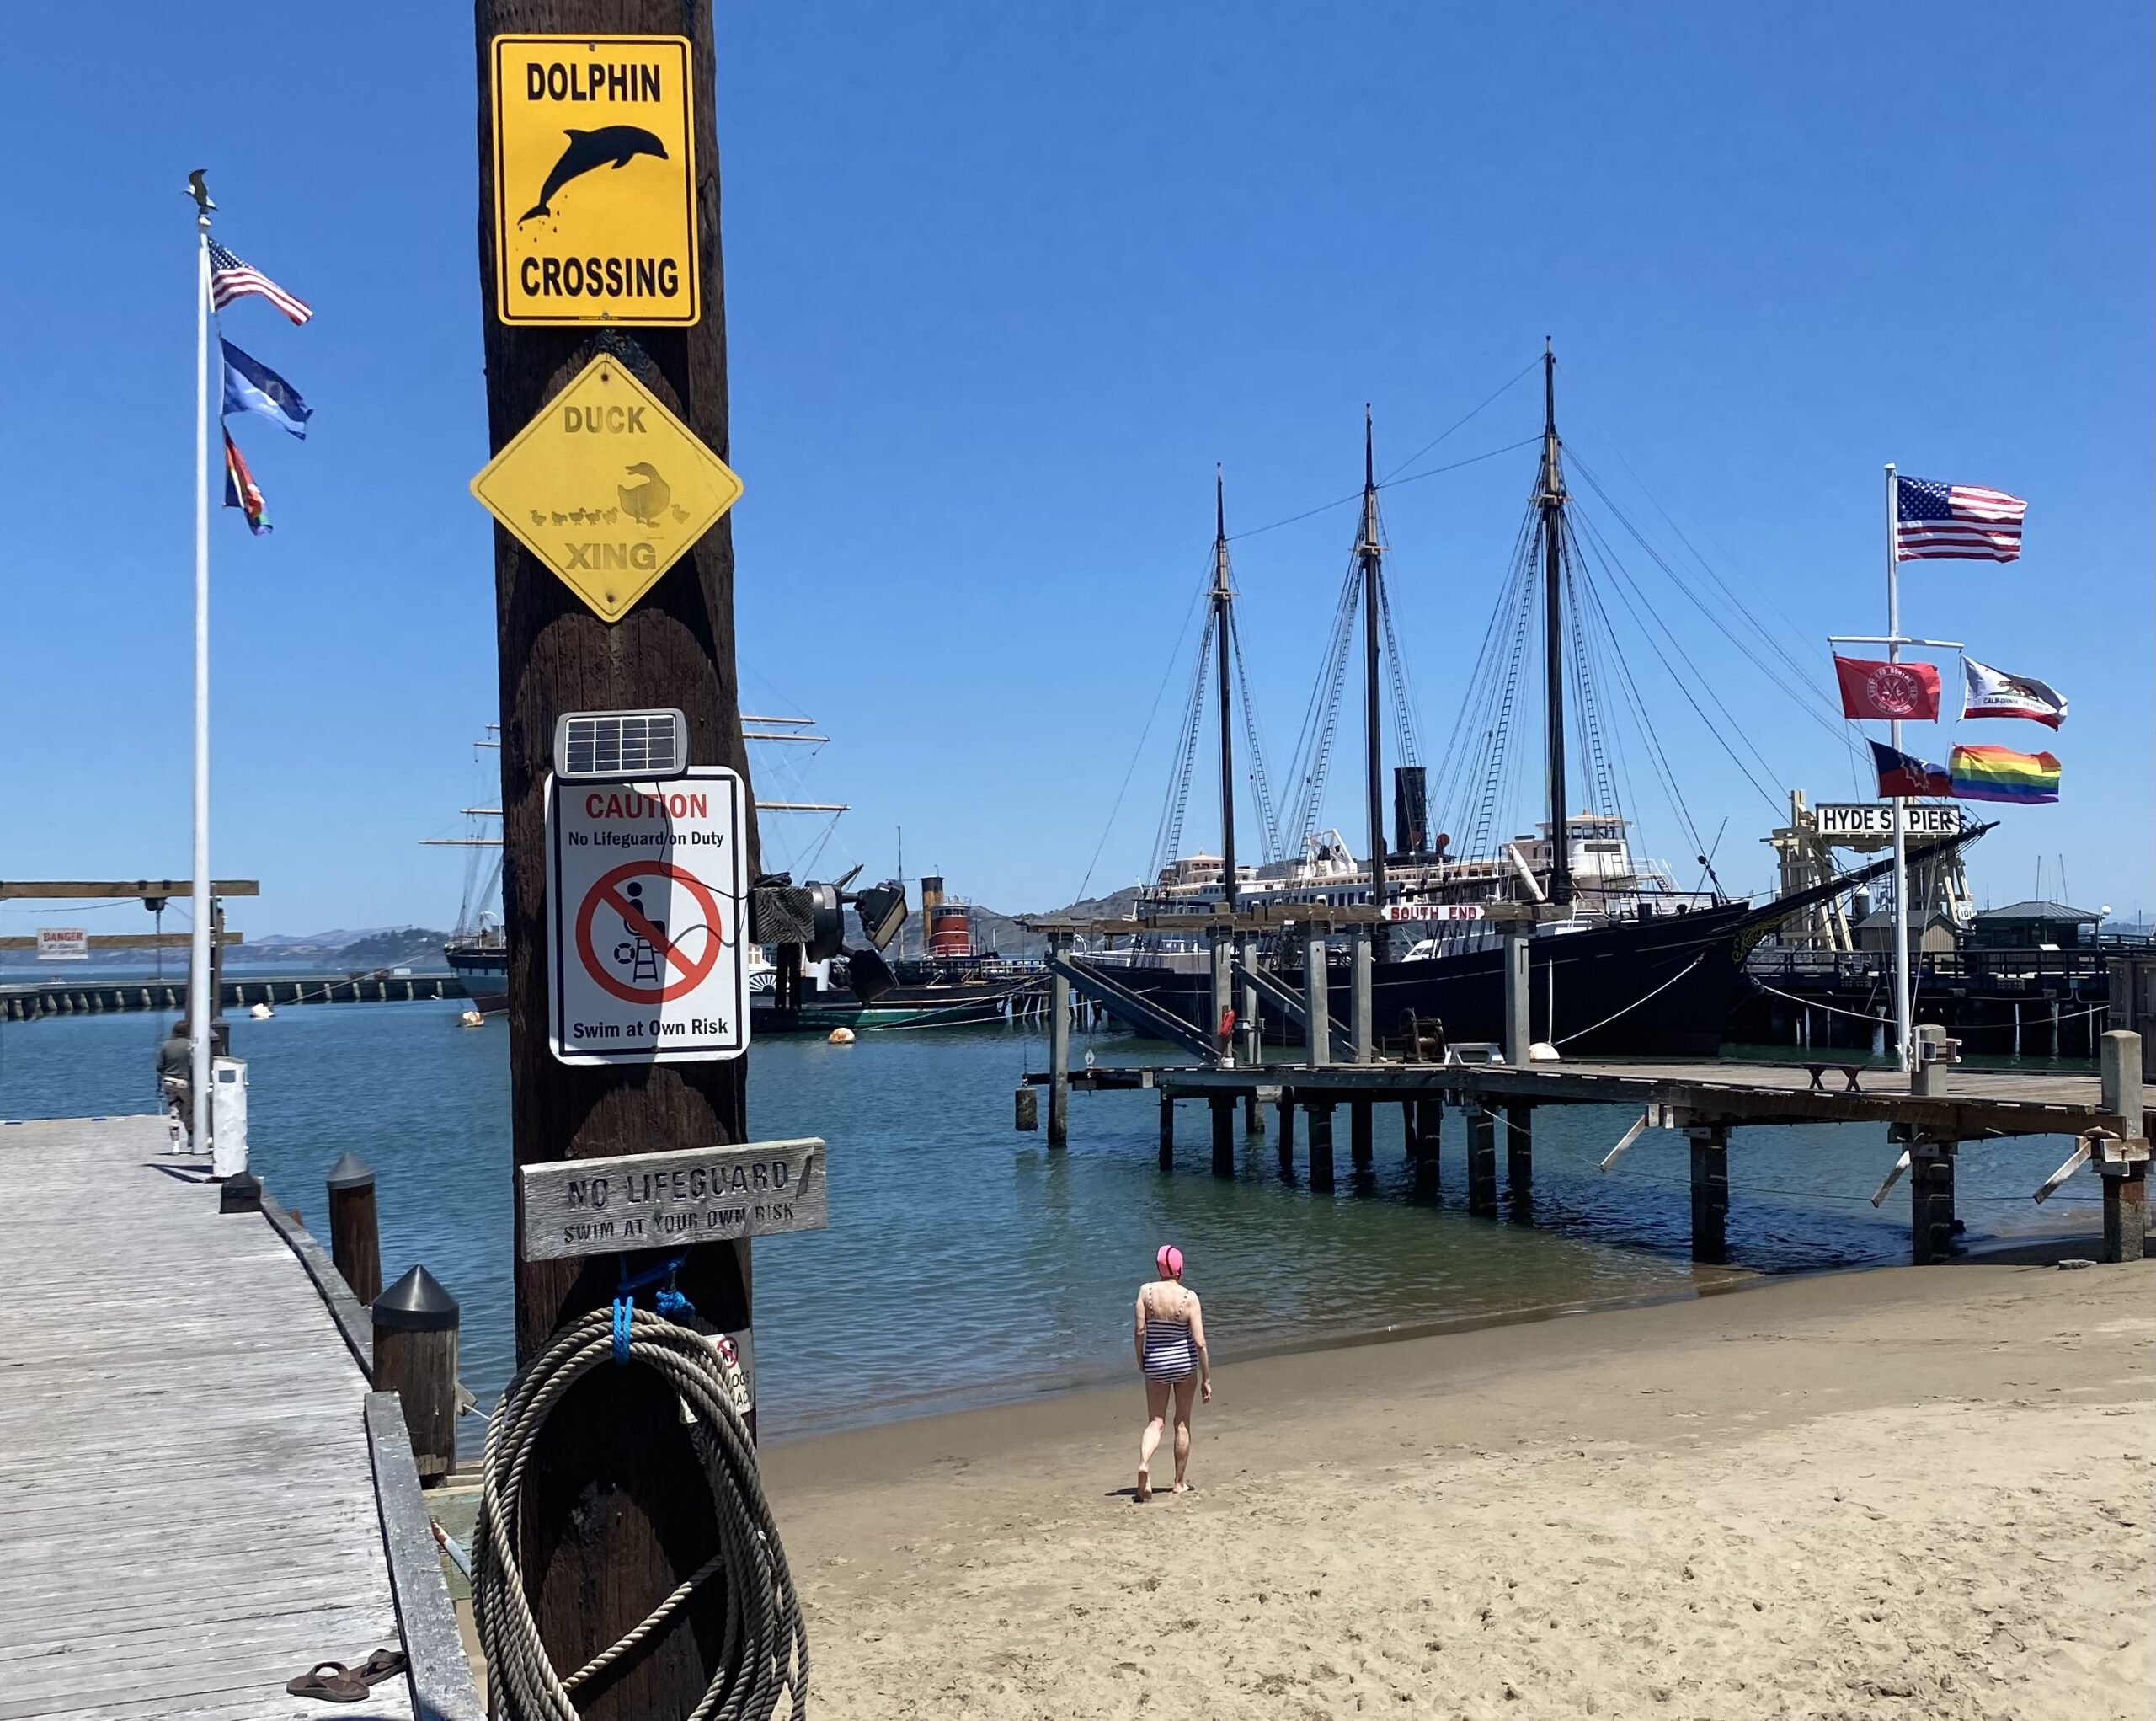 People walk on the beach towards the pier where the boat is. Signs warn that there are no lifeguards and humorously illustrate the animals crossing.